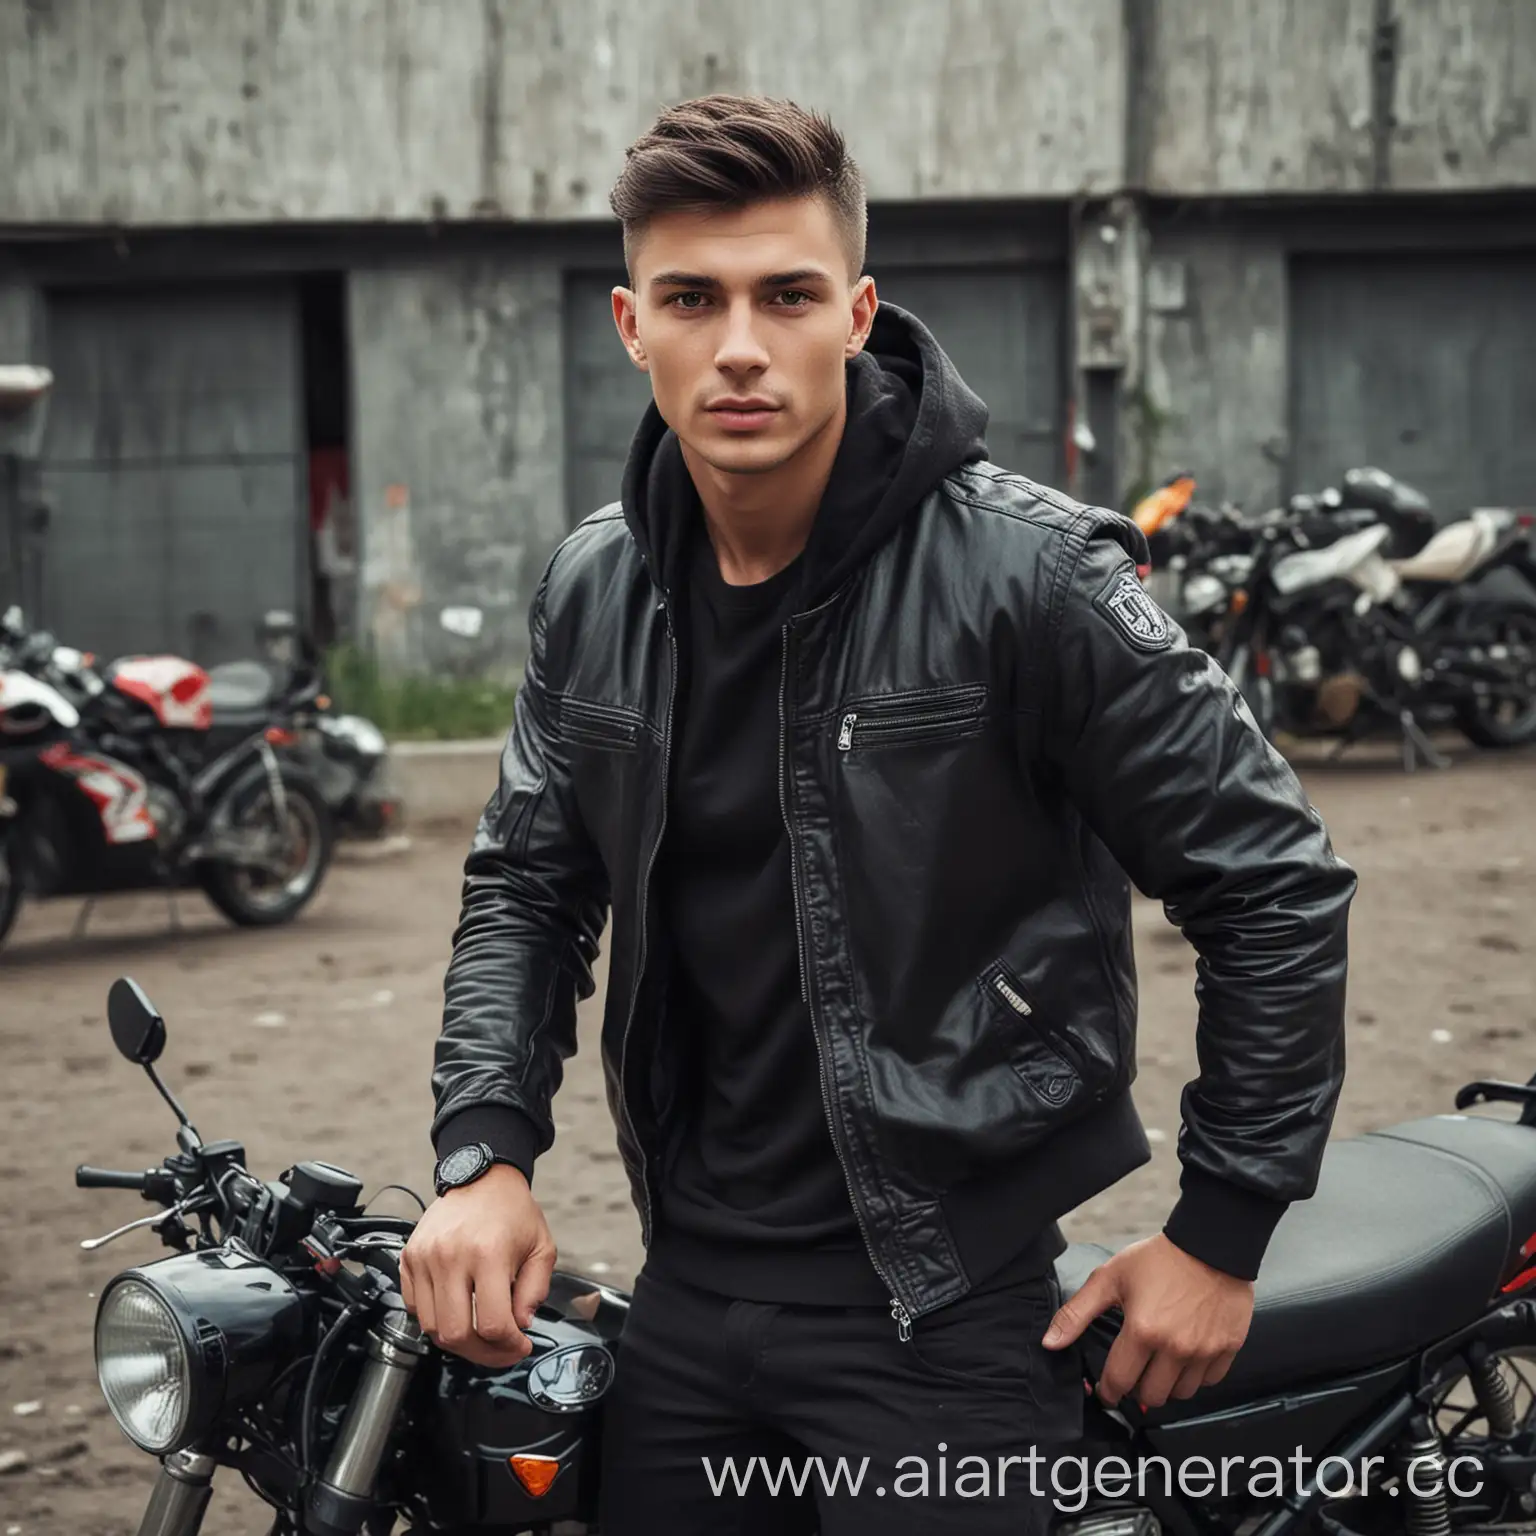 Sporty-DarkHaired-Man-with-a-Passion-for-Automotive-Lifestyle